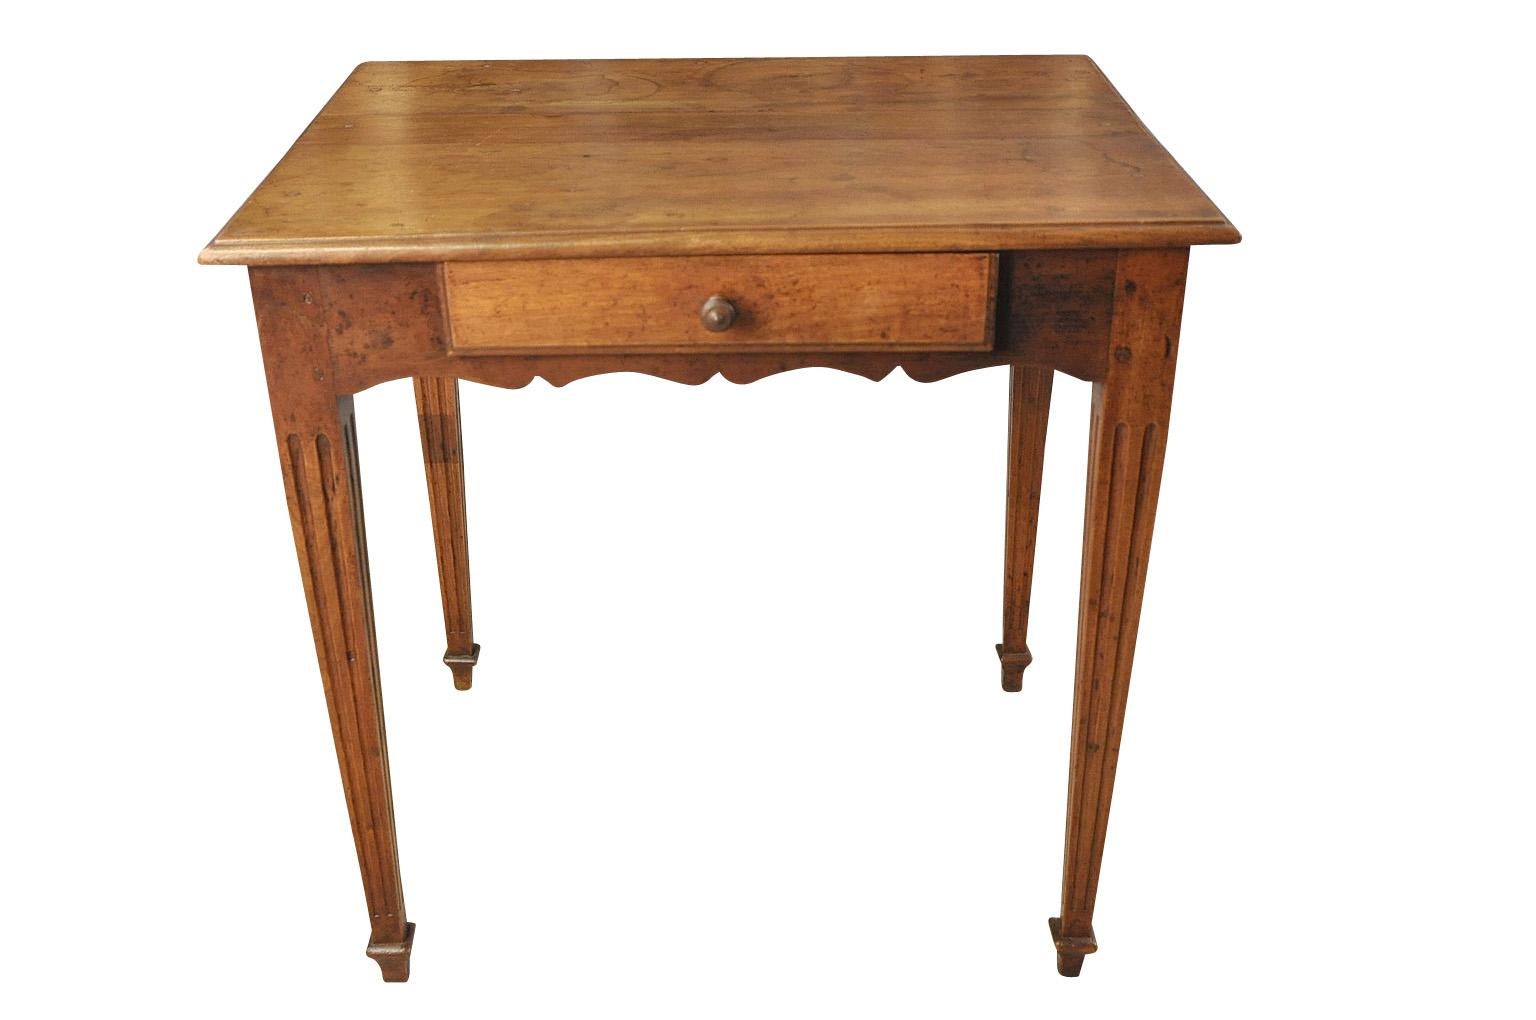 A very charming early 19th century side table from the South of France. Wonderfully constructed from walnut with fluted tapered legs, a sculpted apron and a single drawer.